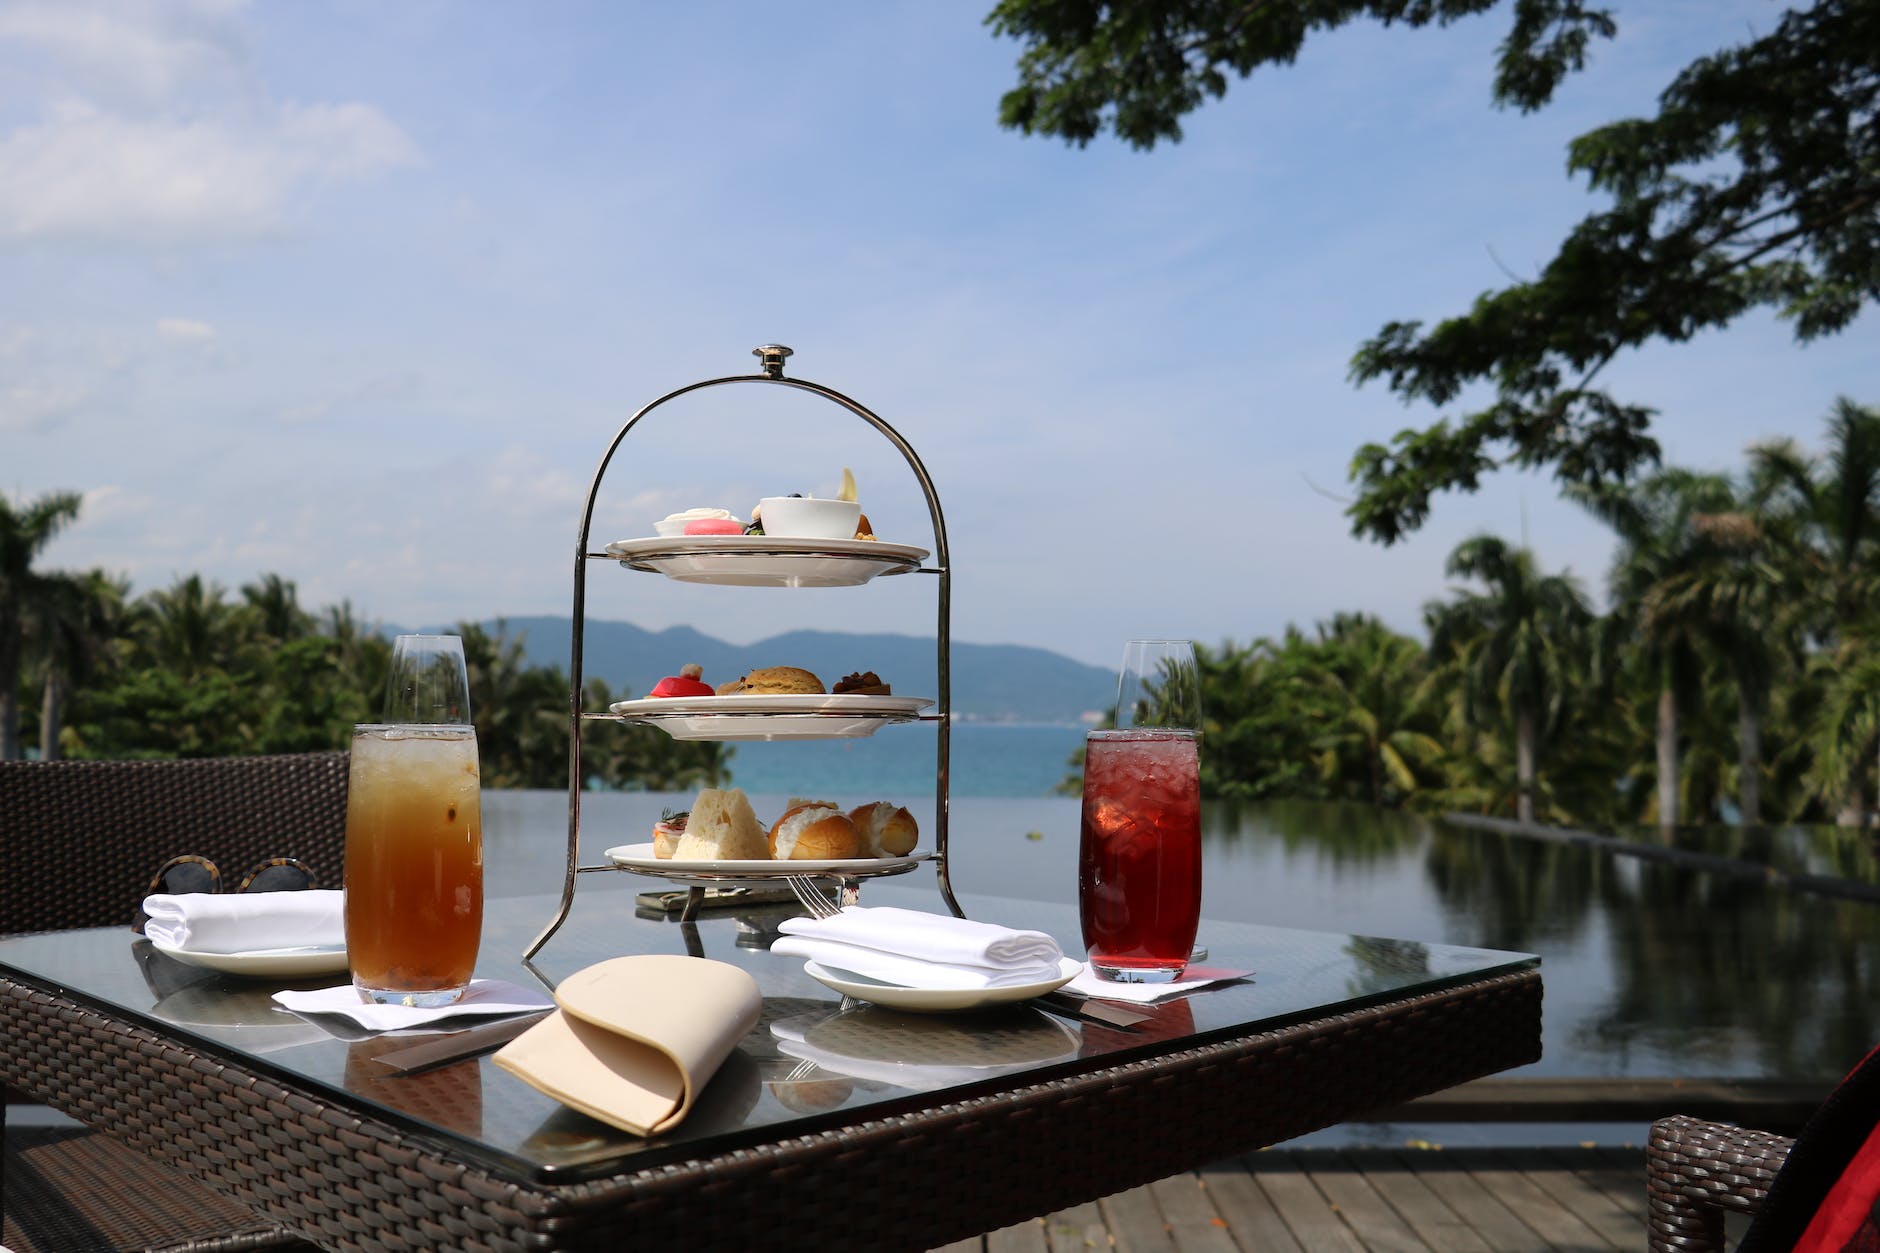 desserts and drinks served on table with lakeside view